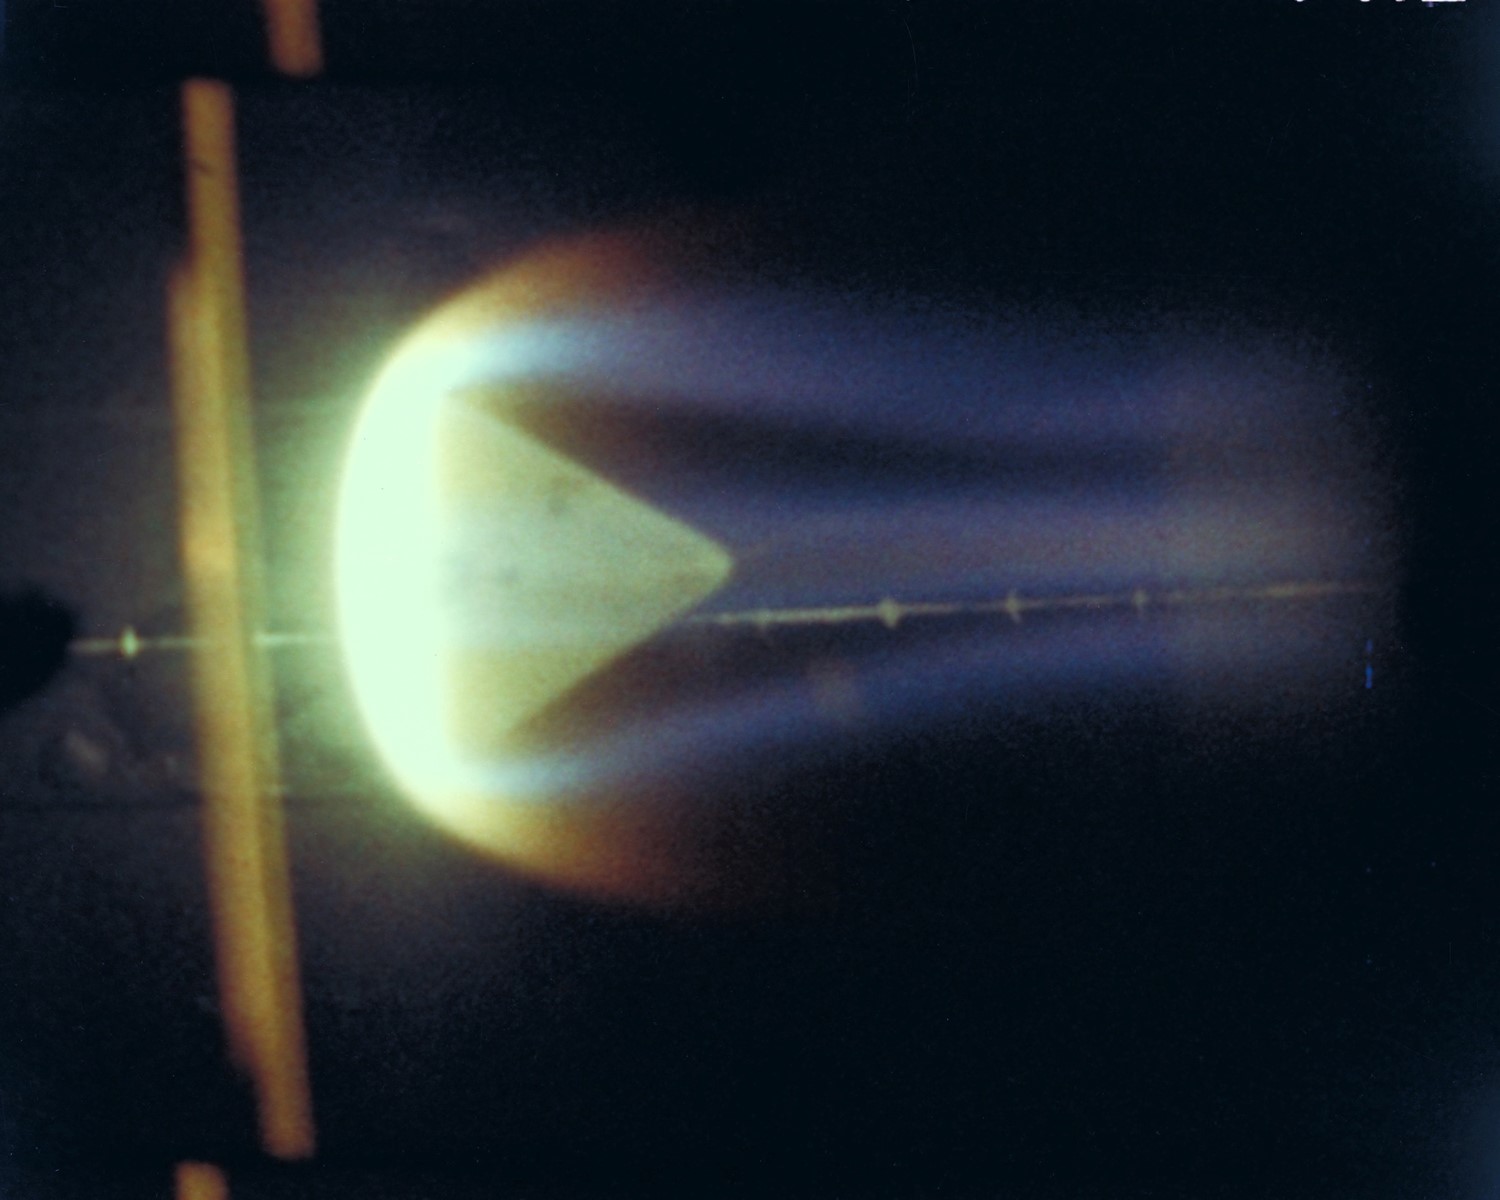 An Apollo heatshield being tested, the tip heated up.